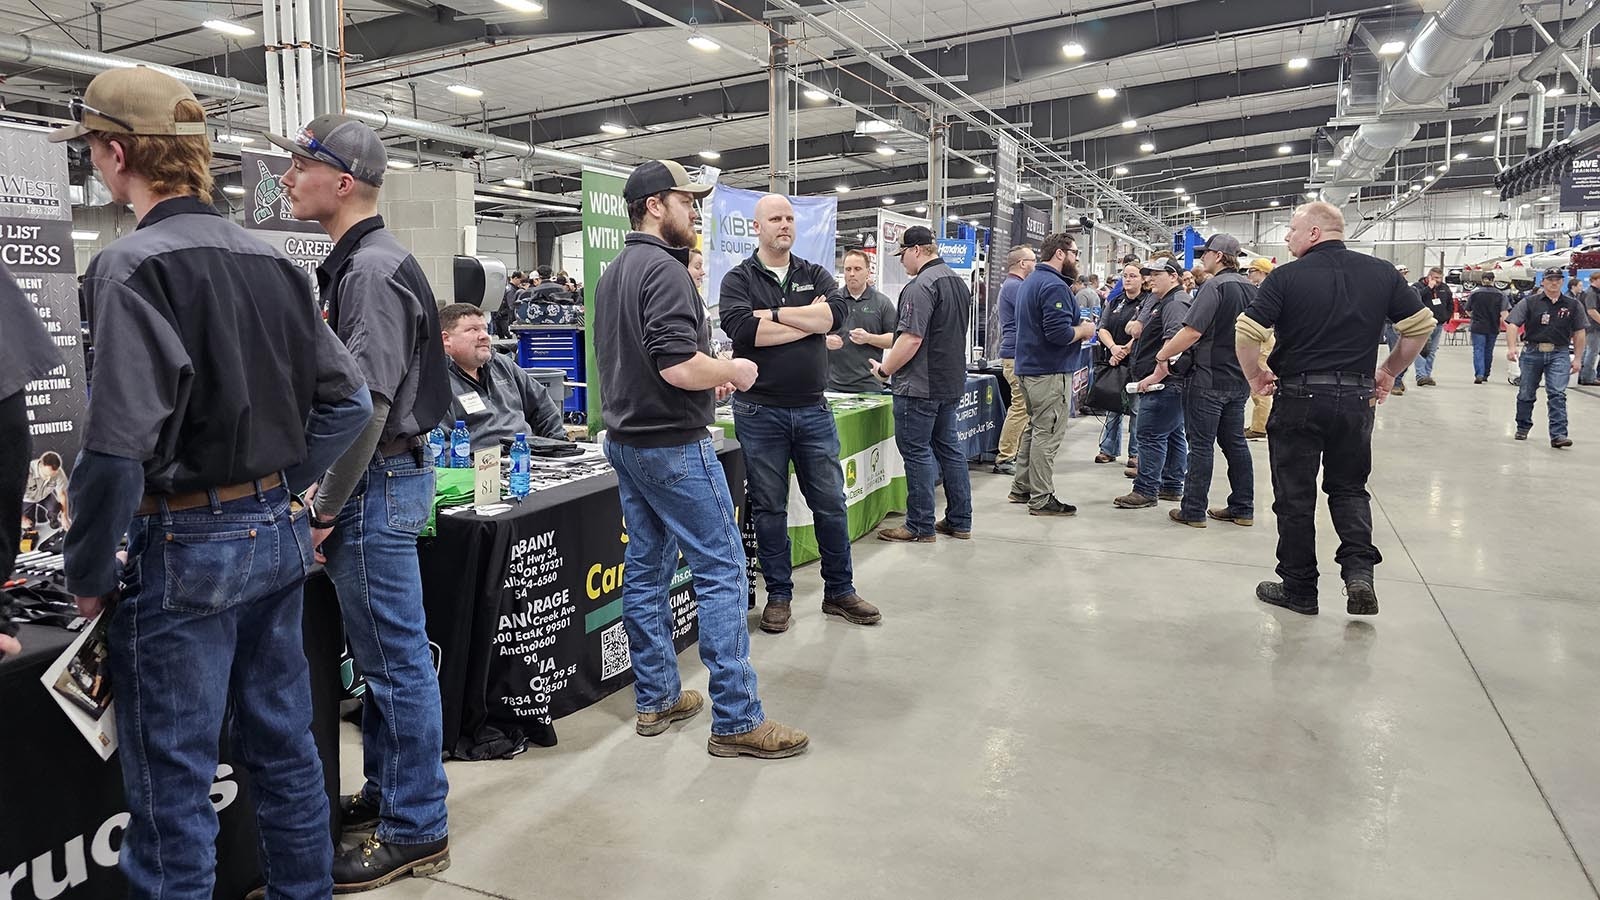 WyoTech's recent career fair featured 103 employers talking with up to 1,200 students in one day. Most of the students who participated in interviews finished the day with multiple job offers.